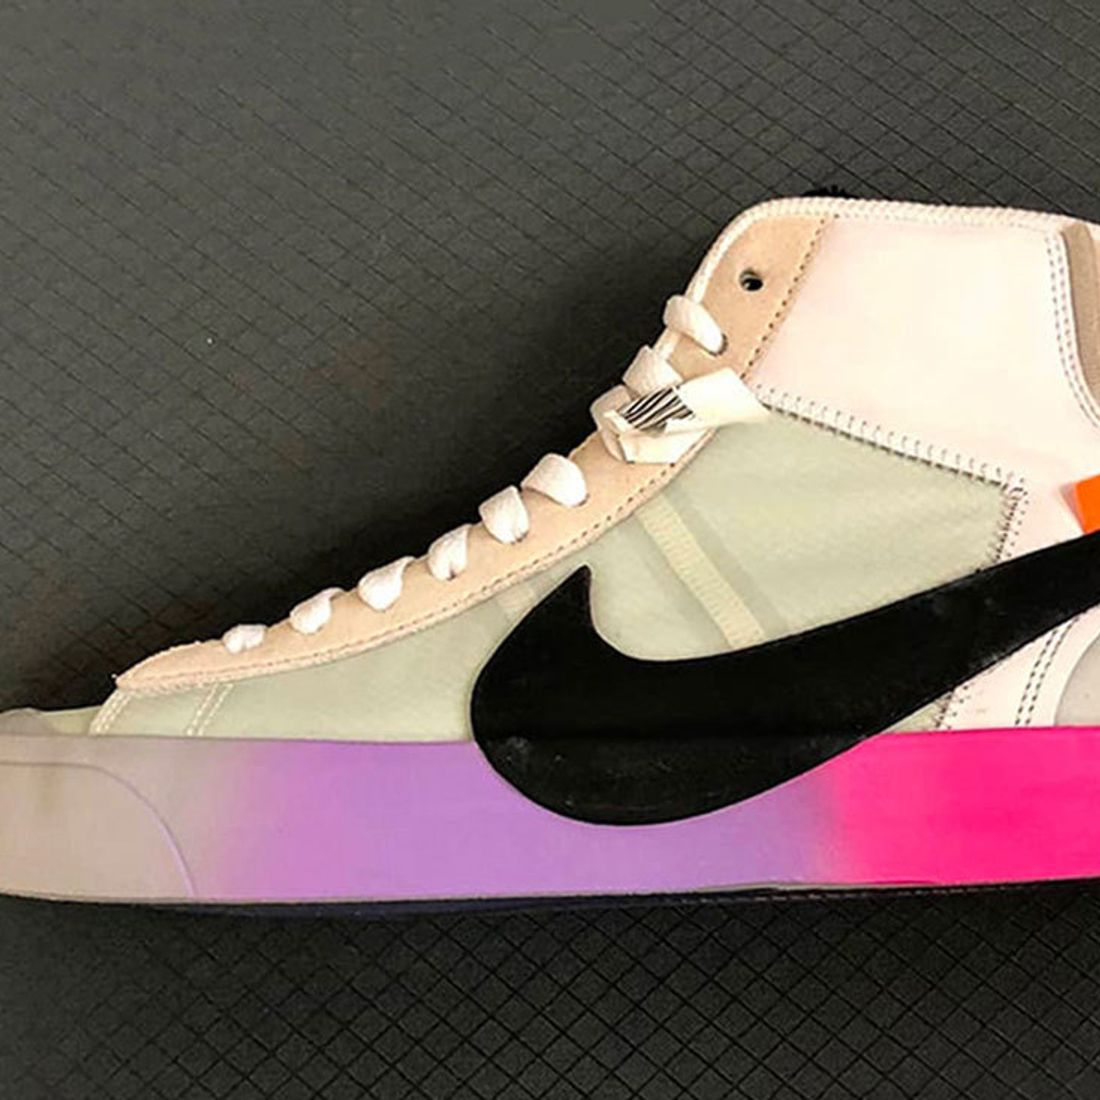 Out Now: Off-White x Nike Air Force 1 Mid 'Graffiti' - Sneaker Freaker